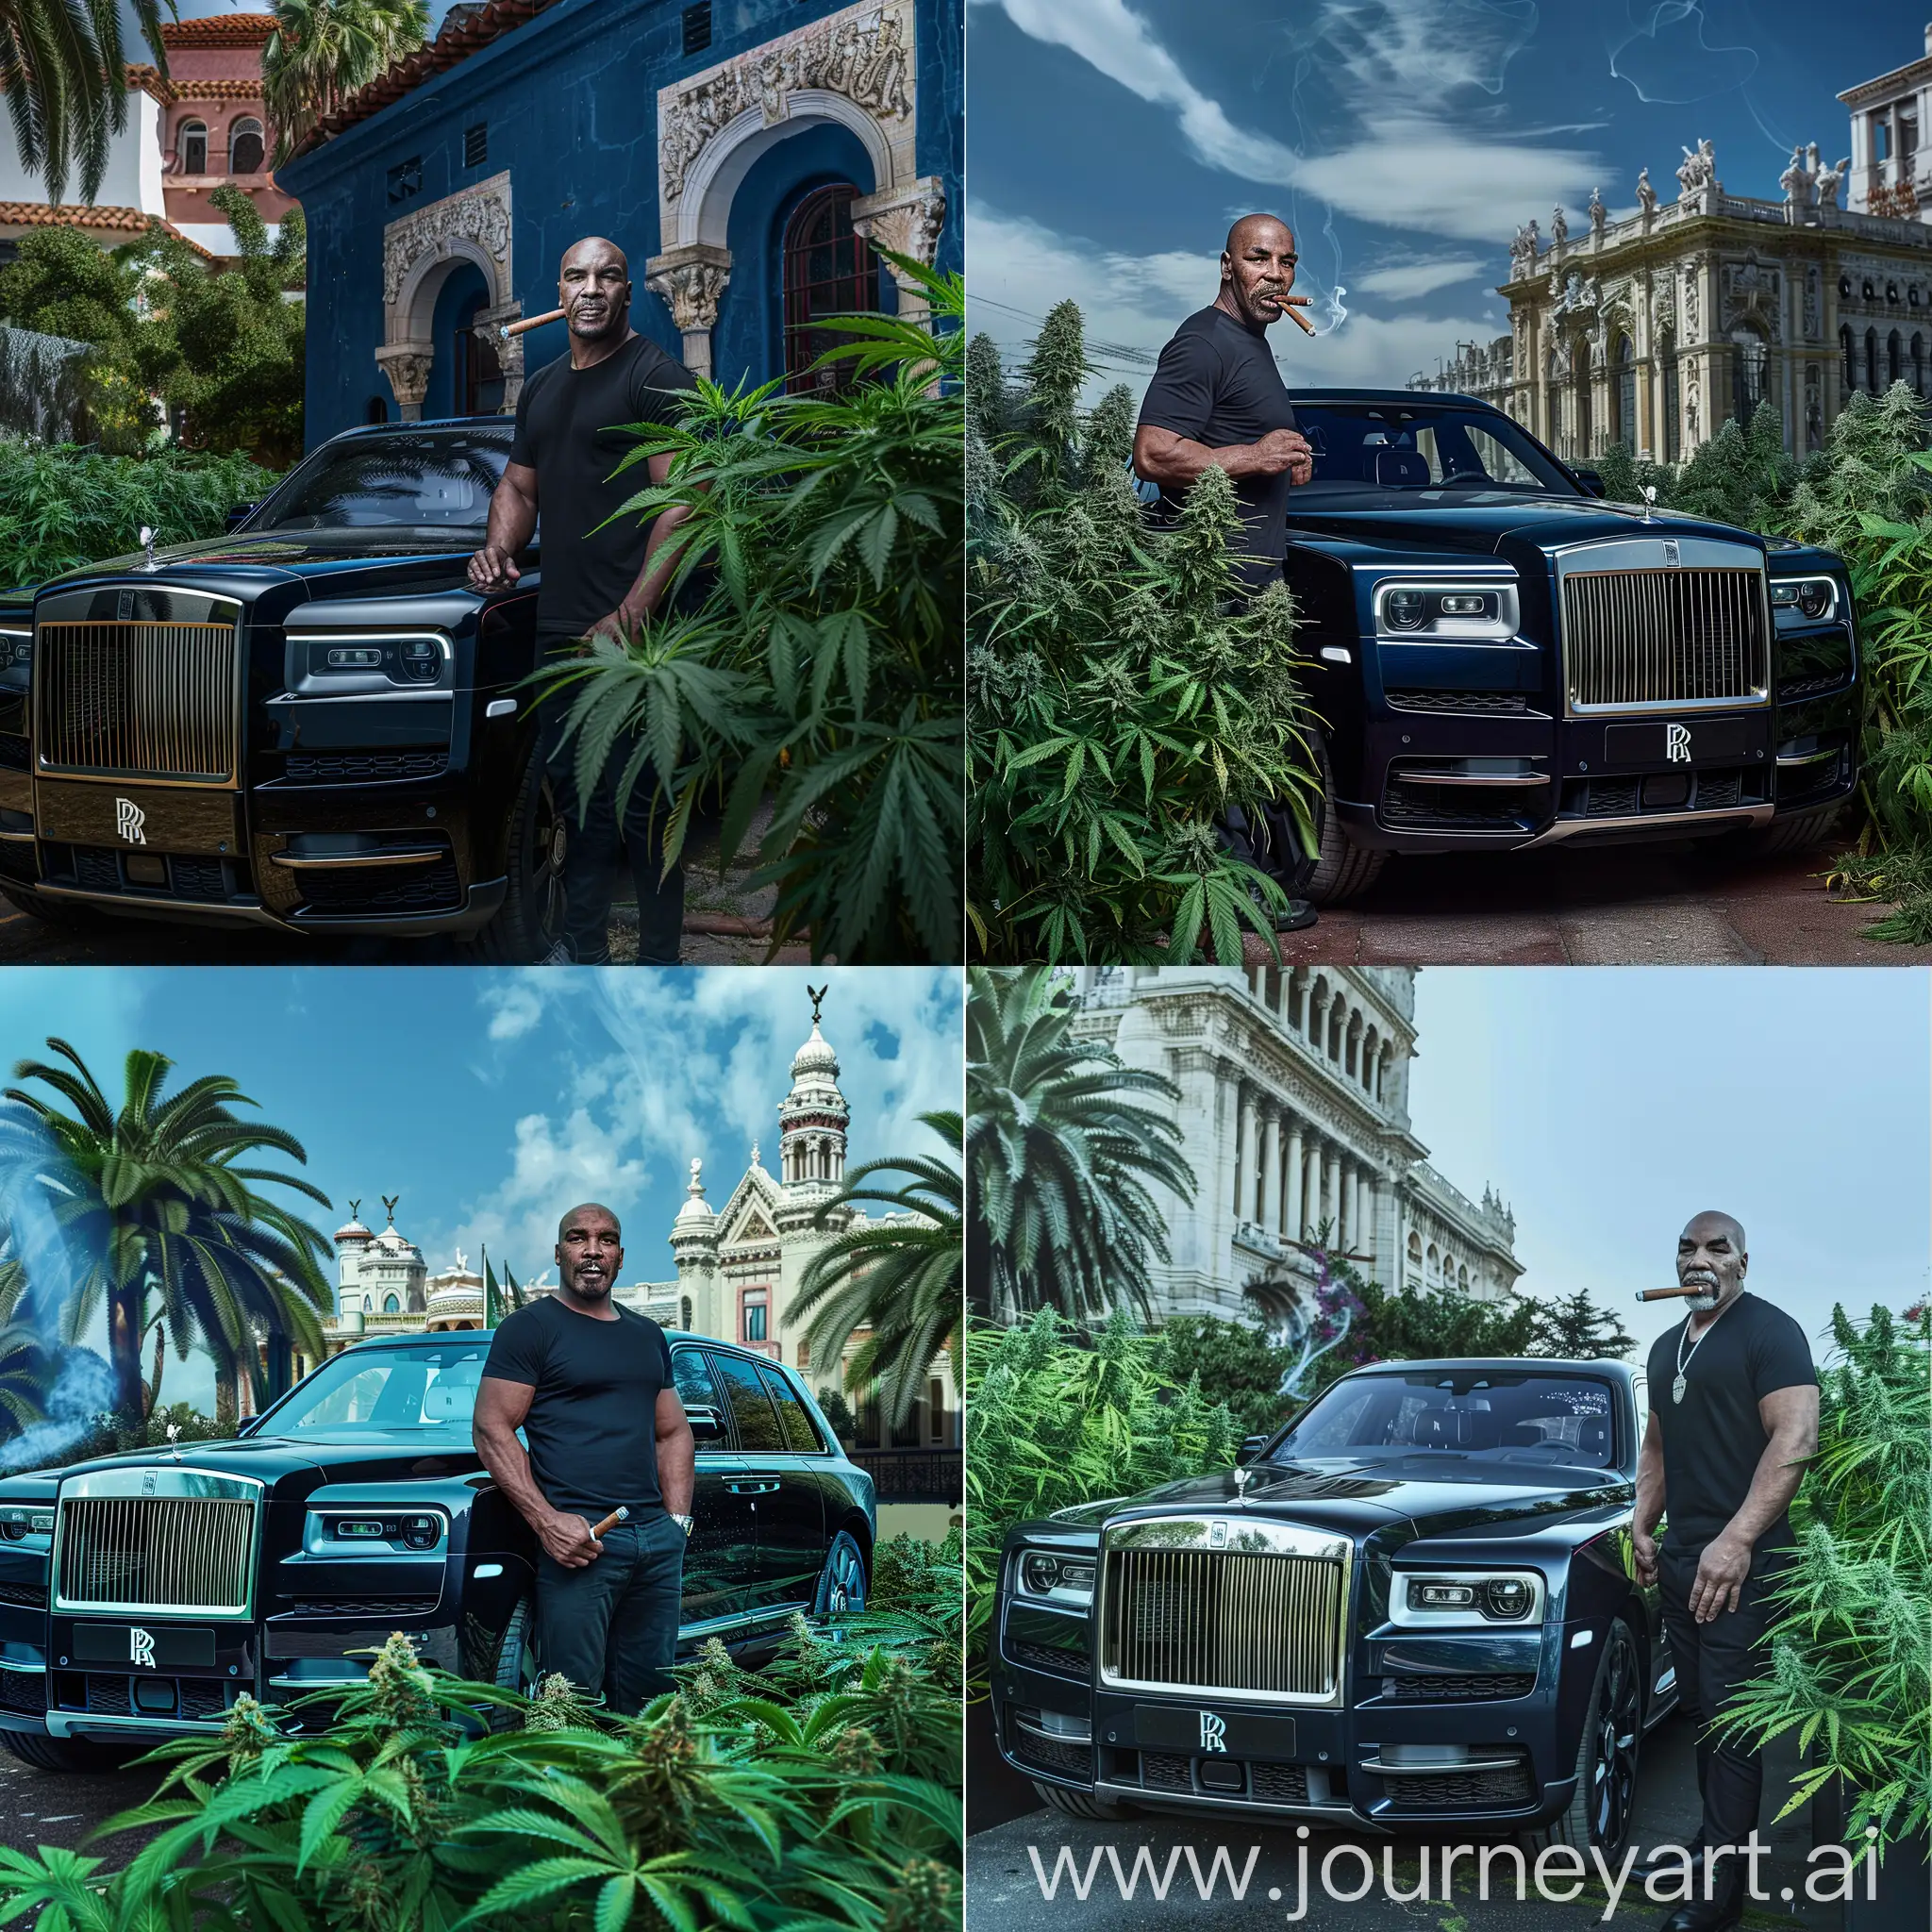 Mike-Tyson-Posing-with-Cigar-and-Rolls-Royce-Cullinan-in-Elegant-Palace-Setting